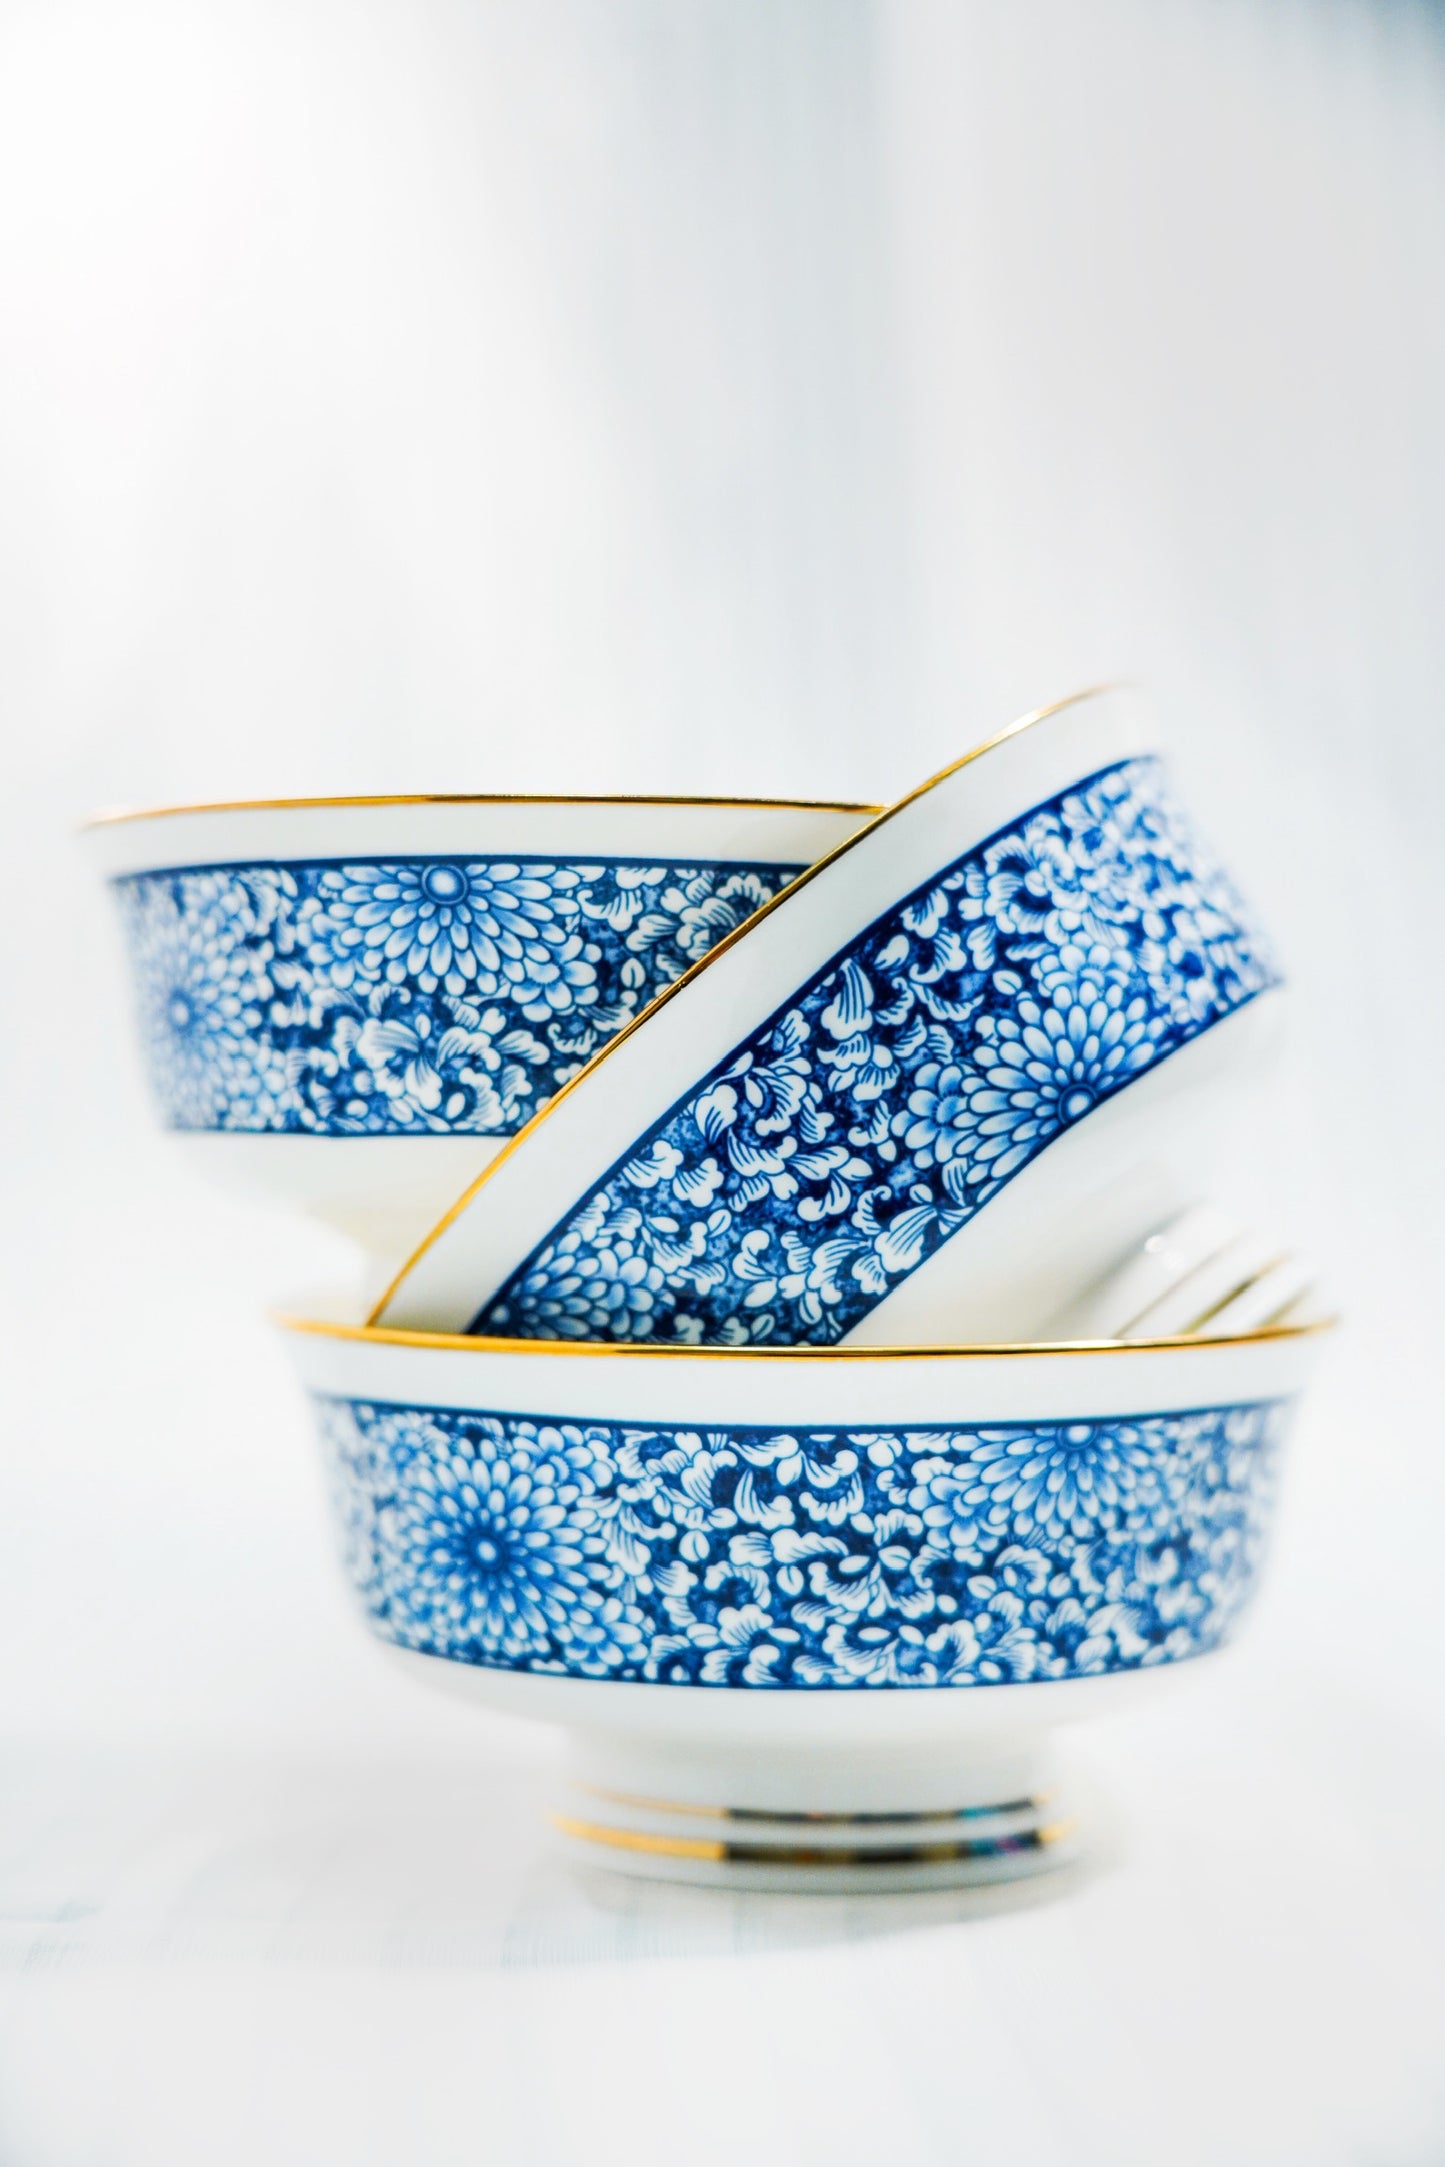 Gold-trimmed Blue and White Porcelain Dinnerware (4 pieces)